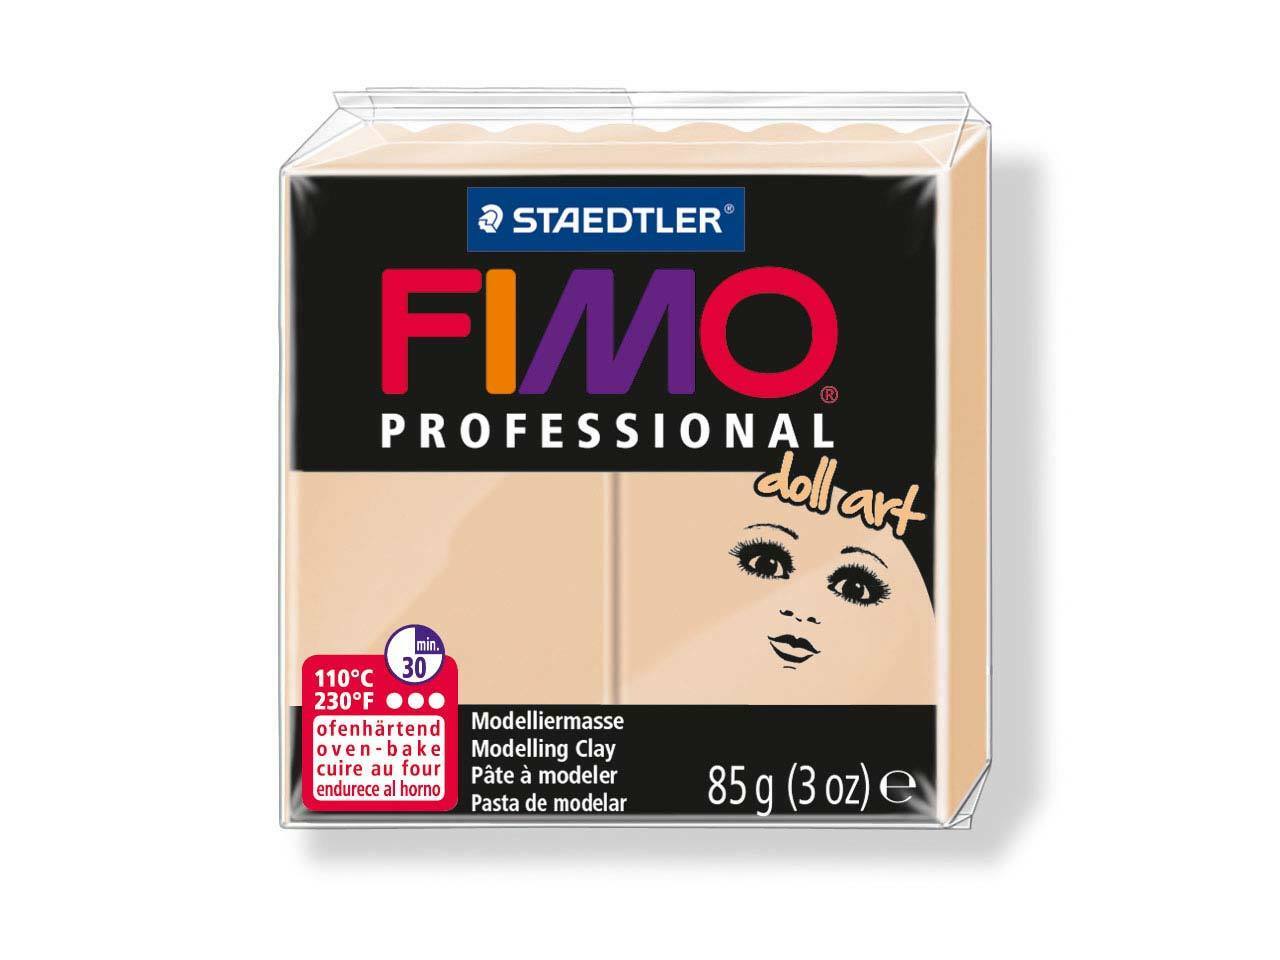 Fimo Professional Doll Art - 85g Packs - Various Colours